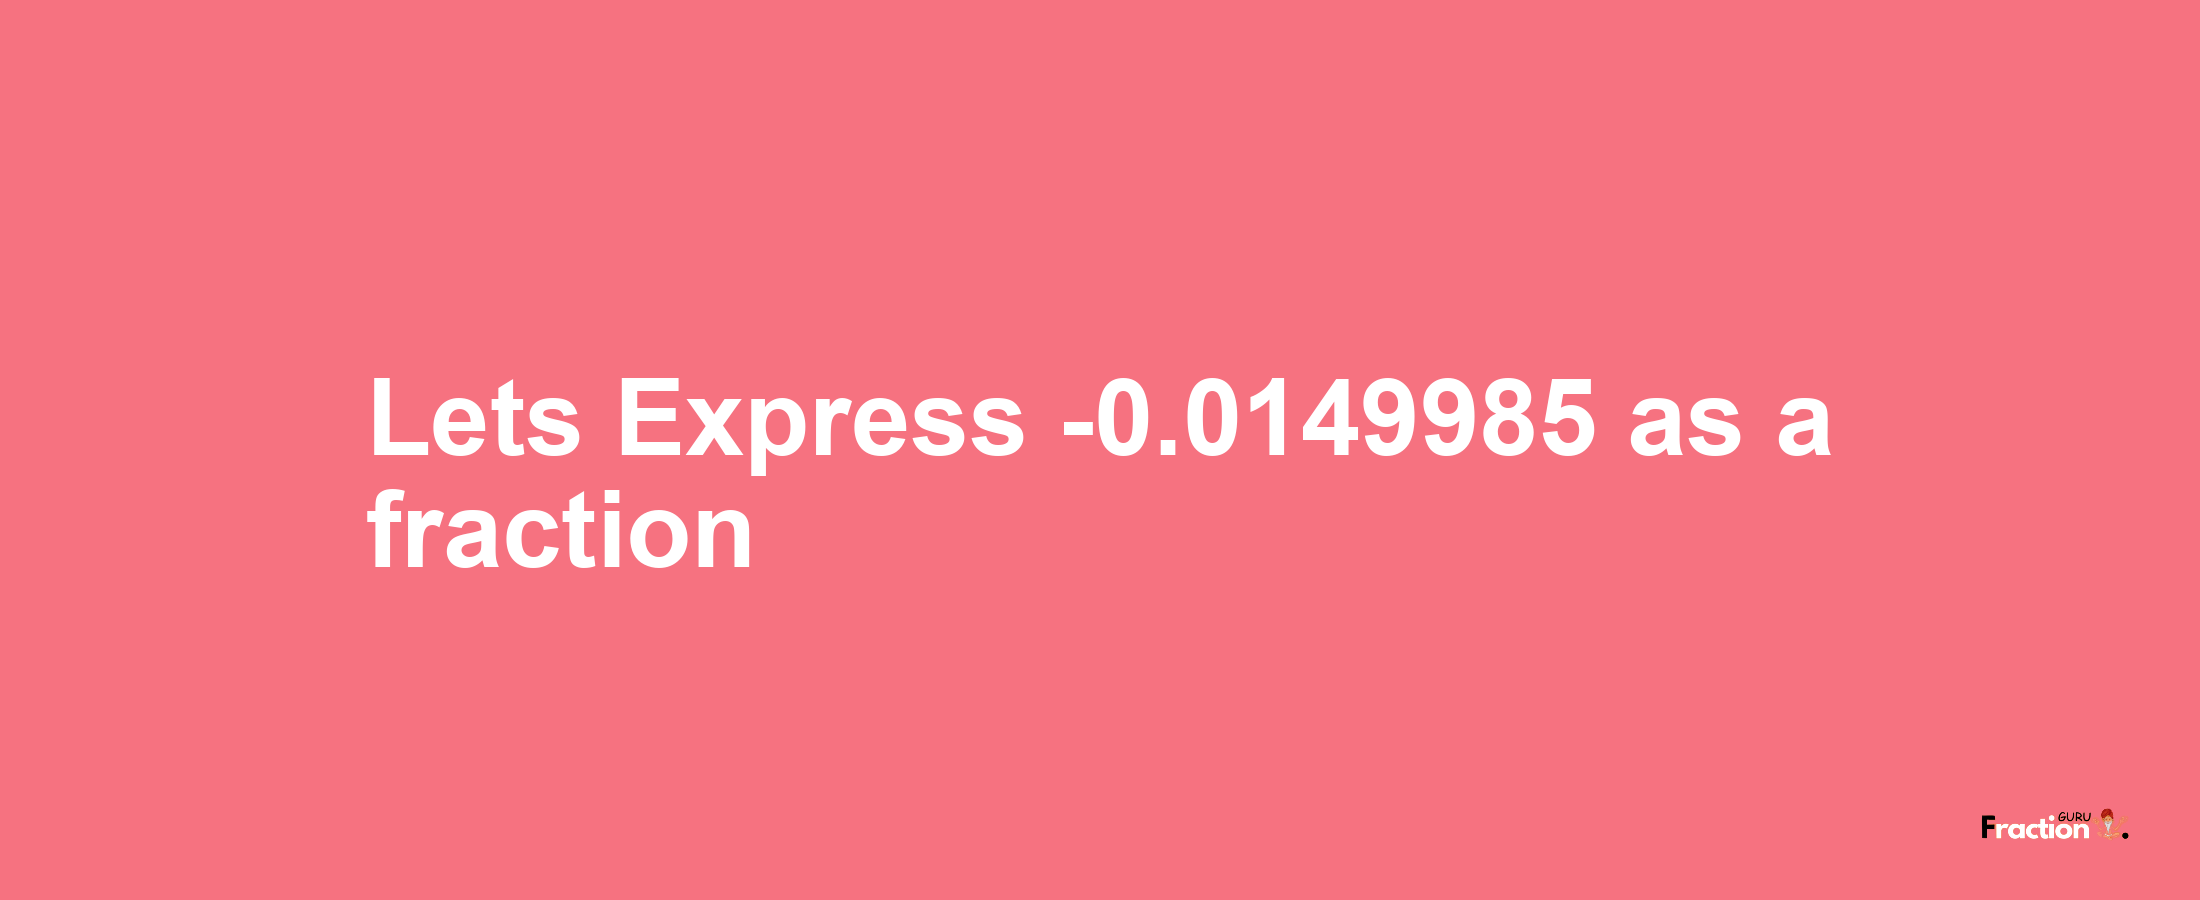 Lets Express -0.0149985 as afraction